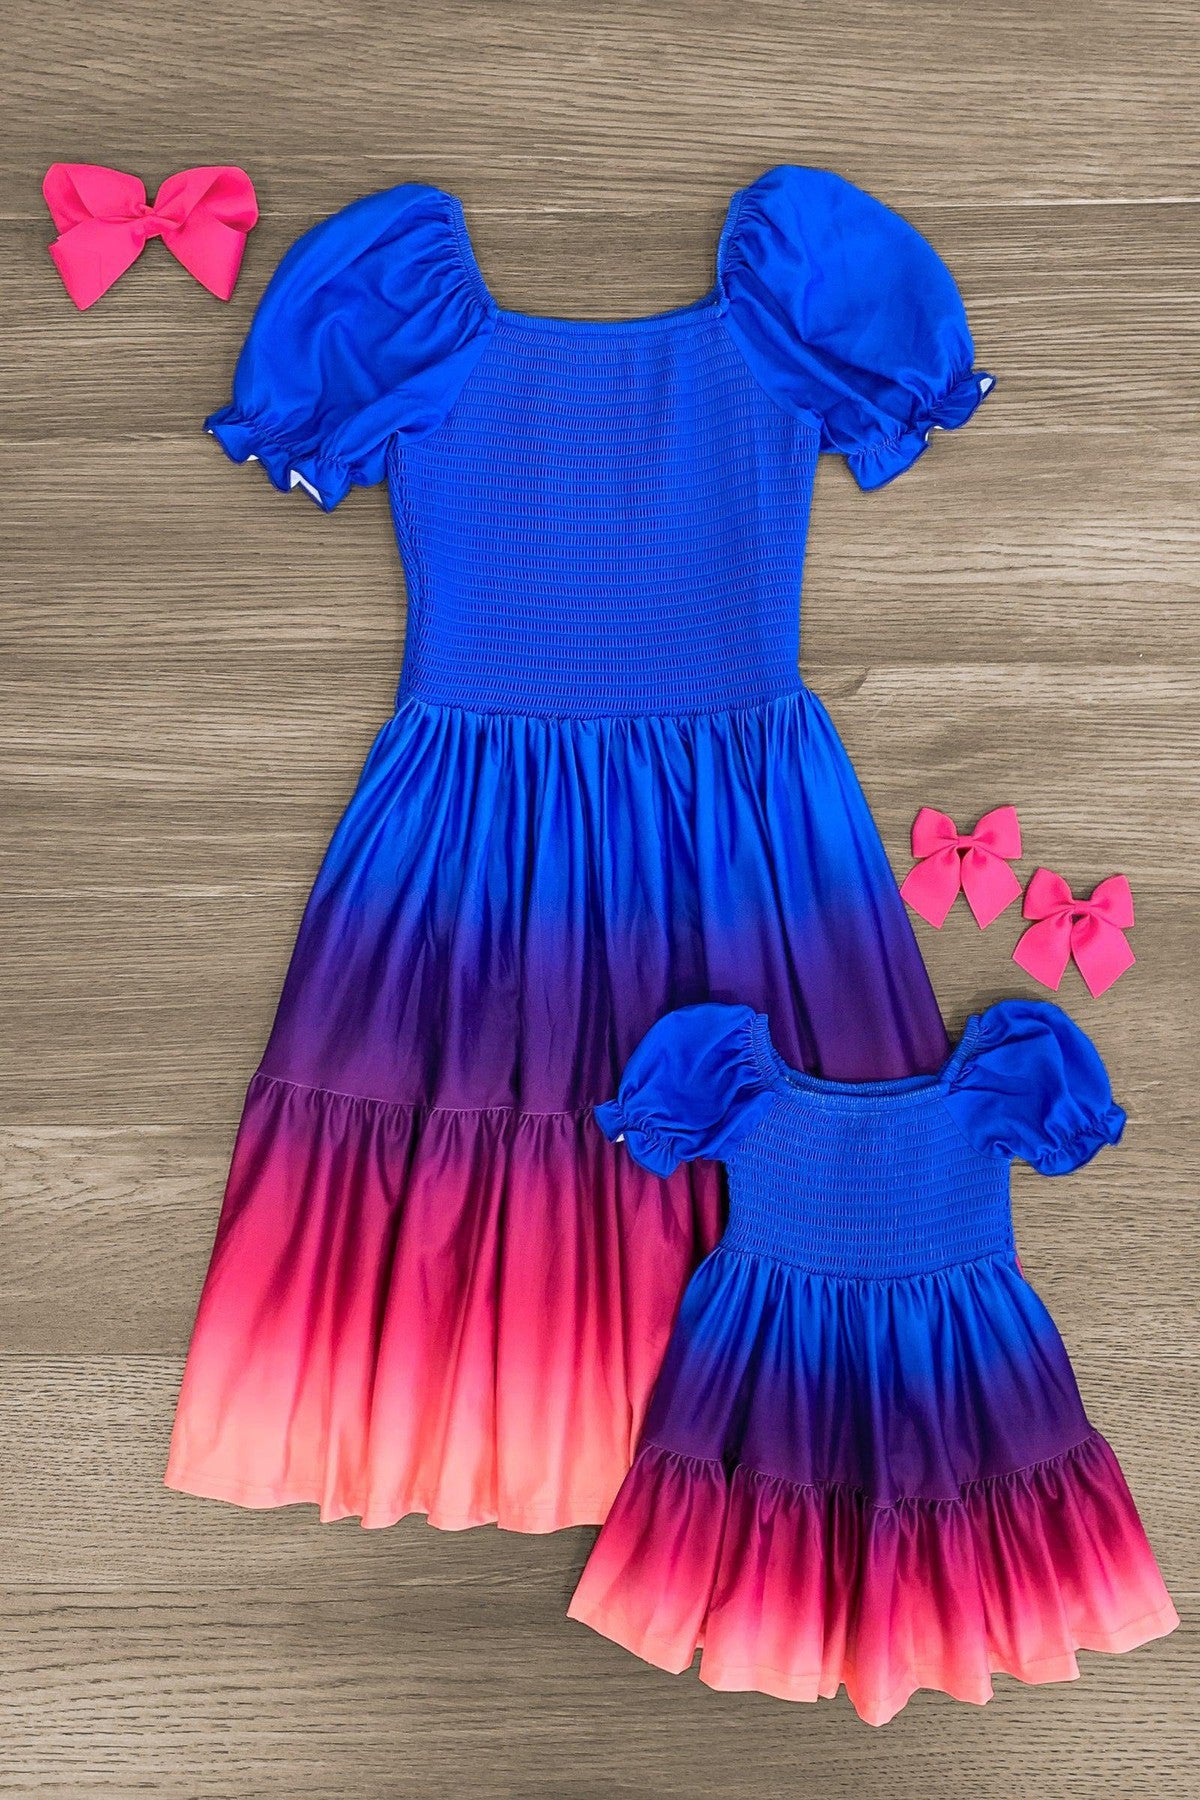 Mom & Me - Blue Sunset Ruffle Dress - Sparkle in Pink